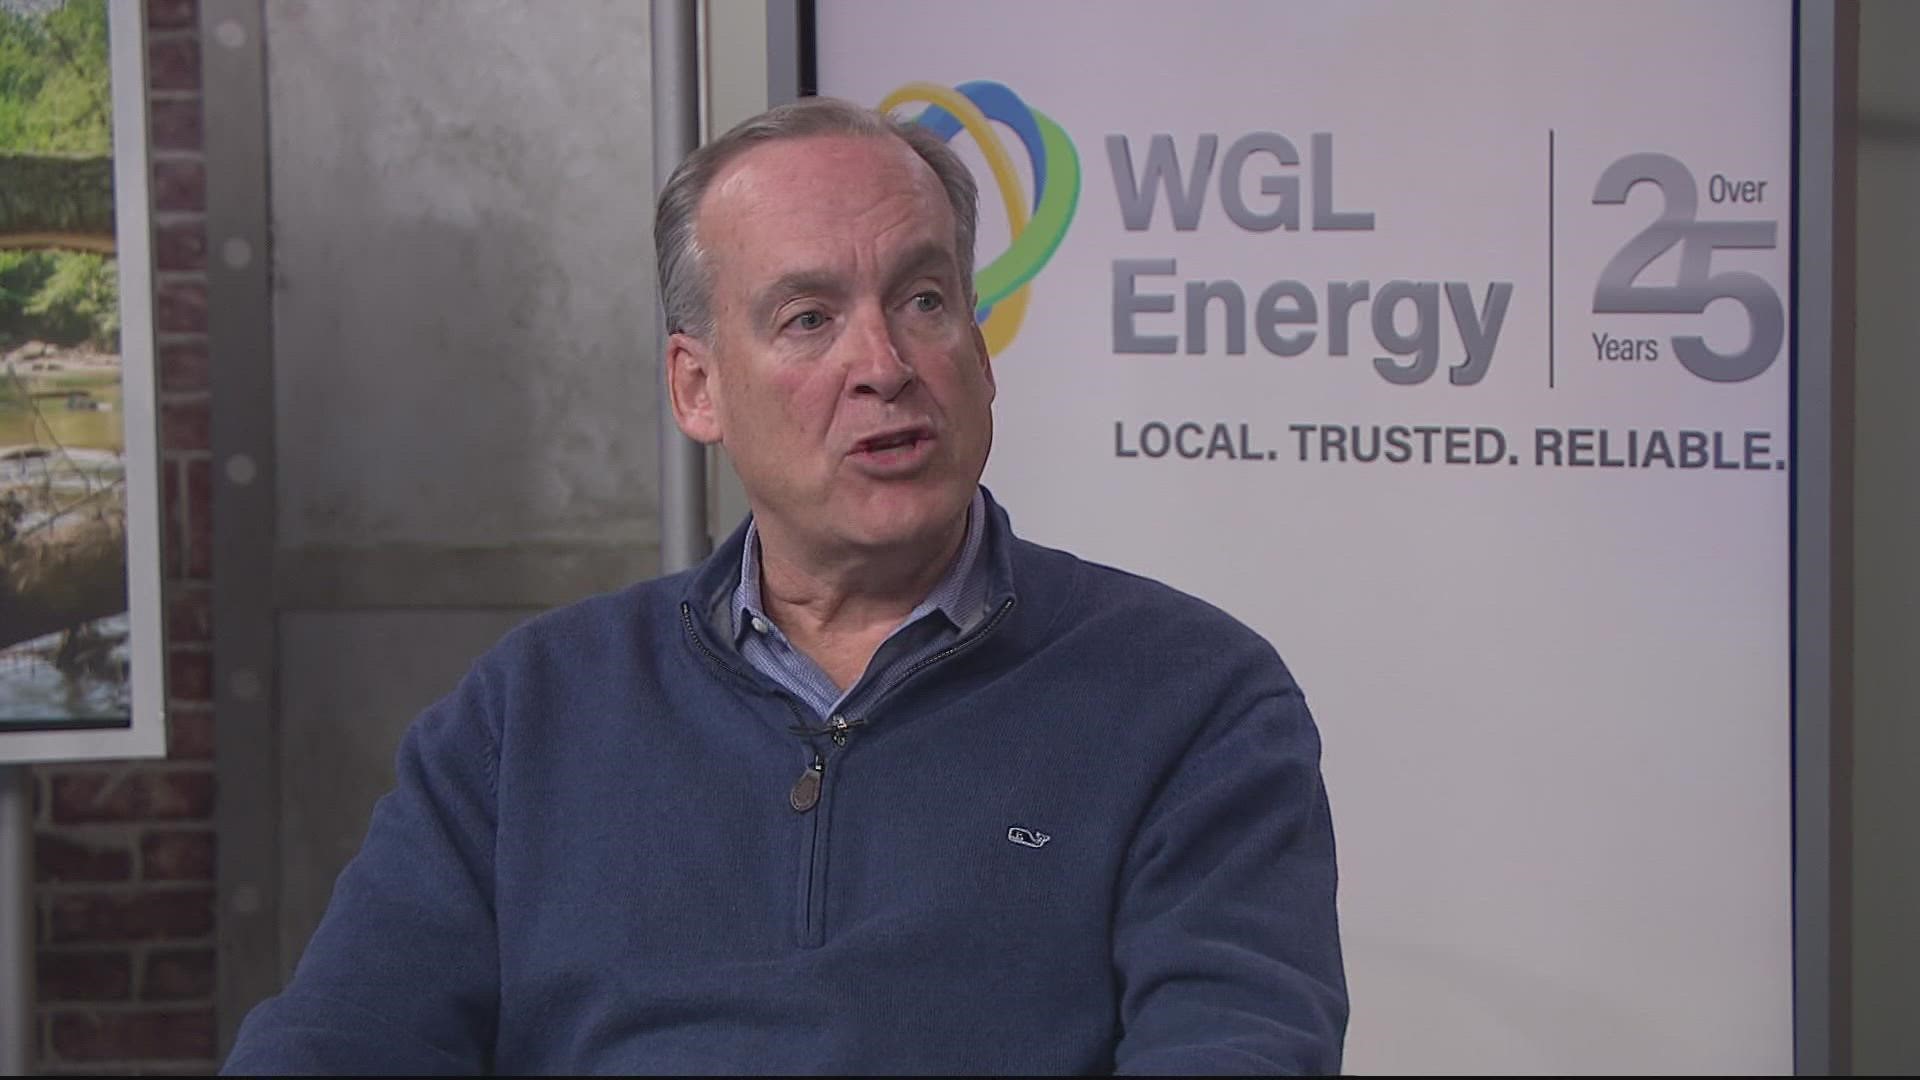 What are carbon offsets? And how do they work? We speak with the President of WGL Energy.